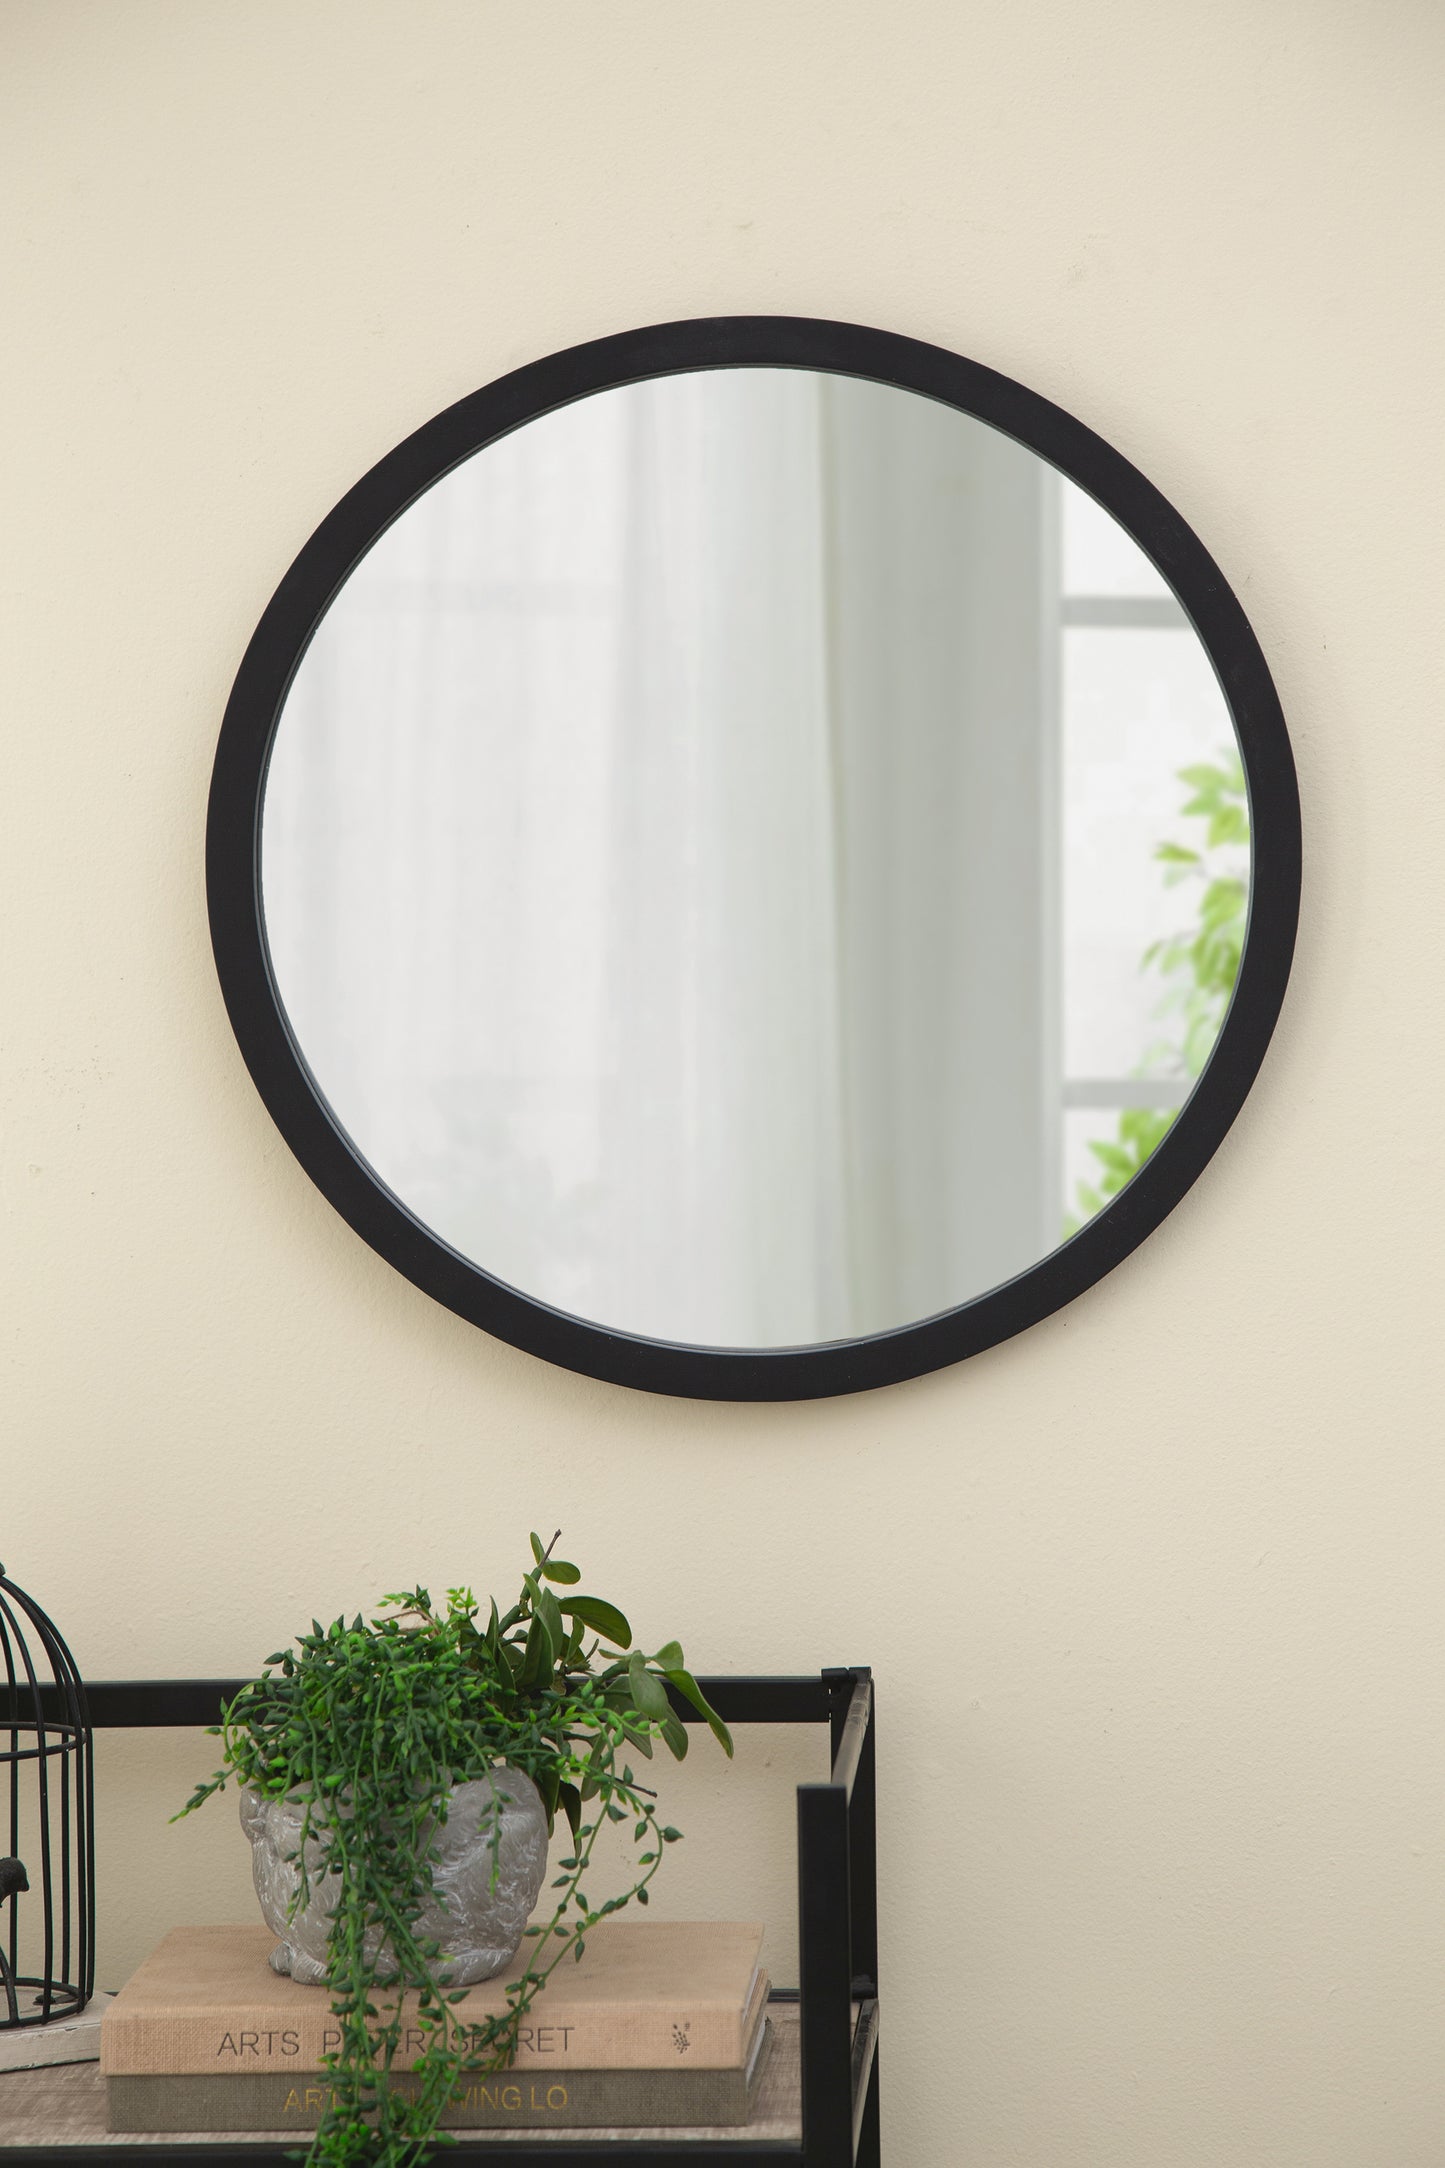 20" x 20" Circle Wall Mirror with Black Wooden Frame